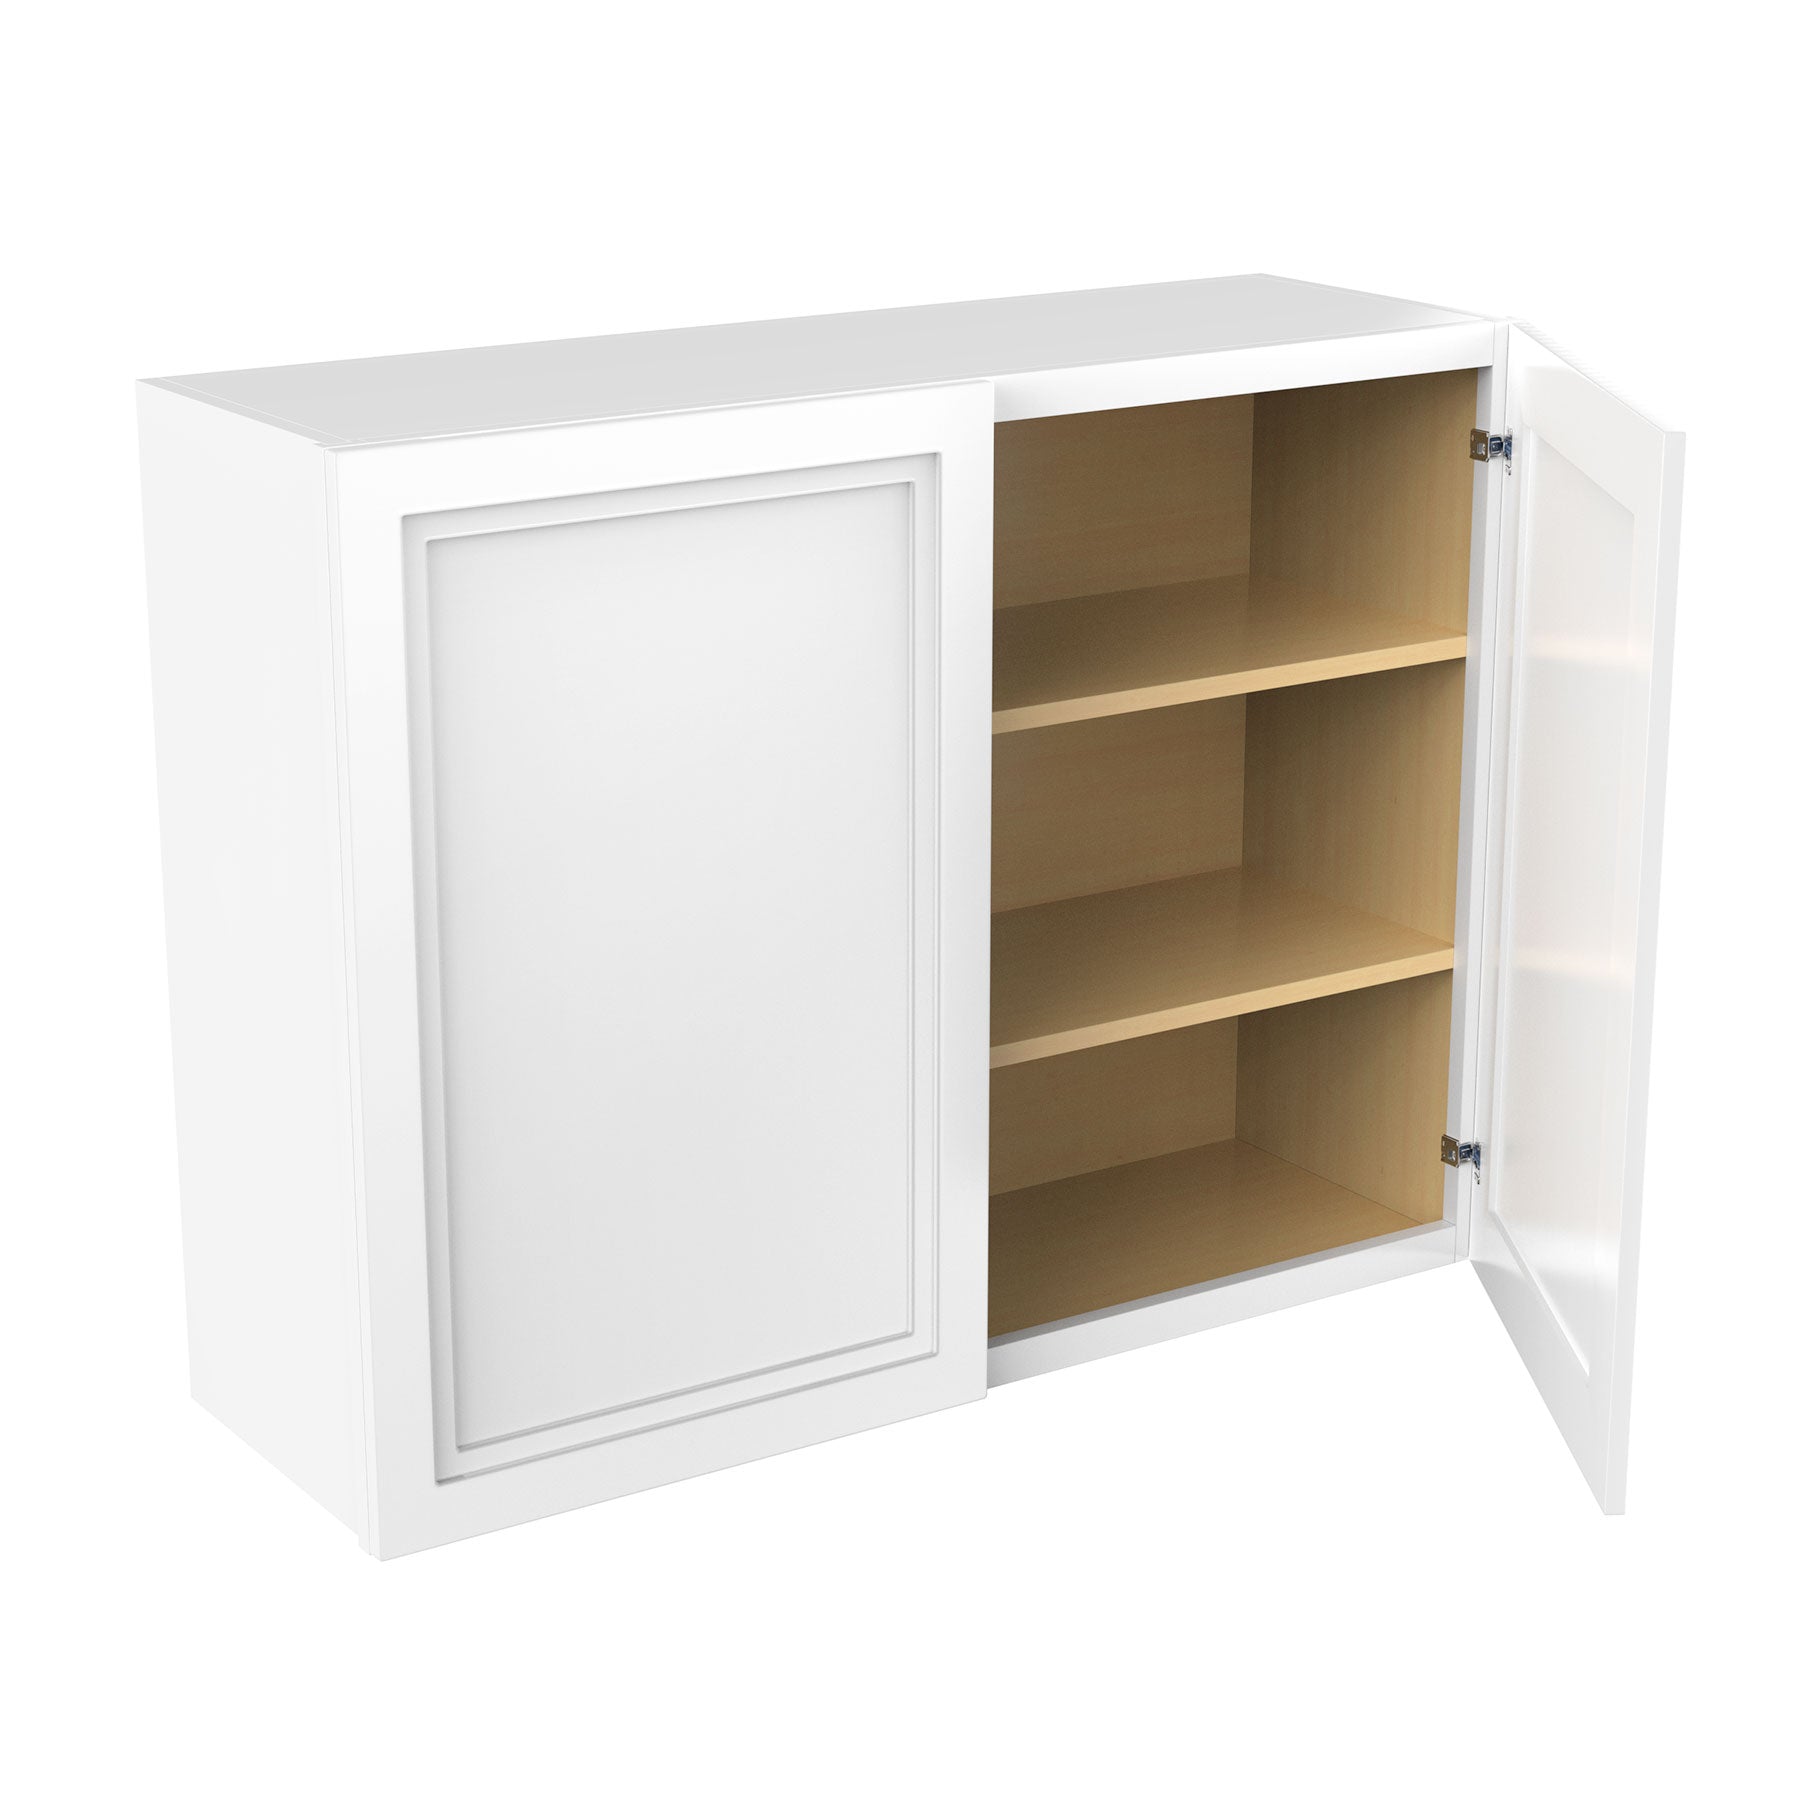 Fashion White - Double Door Wall Cabinet | 39"W x 30"H x 12"D